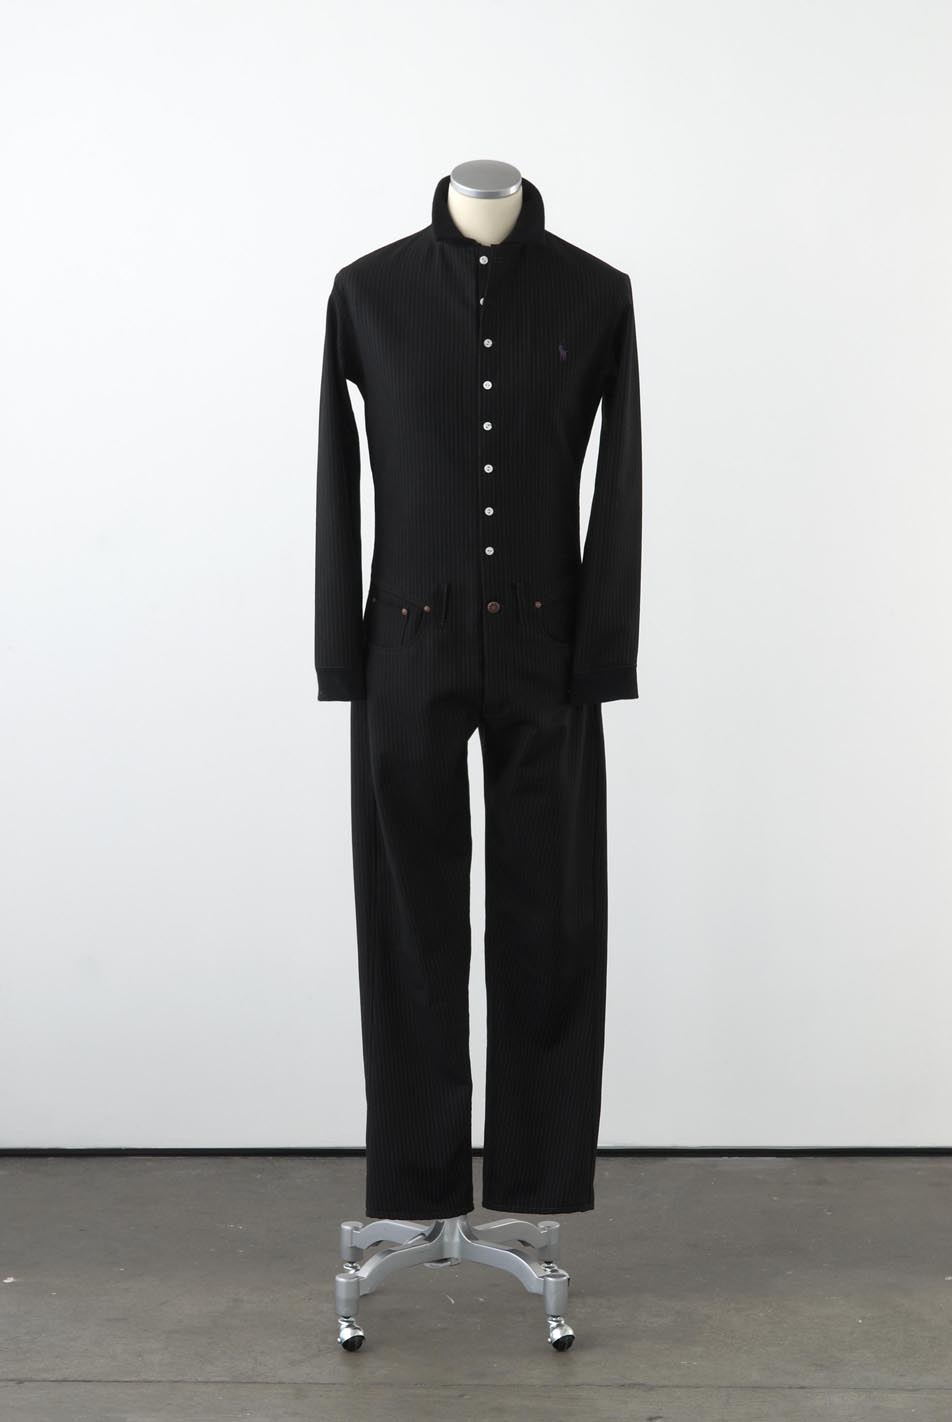     Matthew Darbyshire Standardised Production Clothing, Version 9 2009 Woollen pinstripe, cotton jersey &amp; fittings on mannequin 185 x 45 x 34 cm 